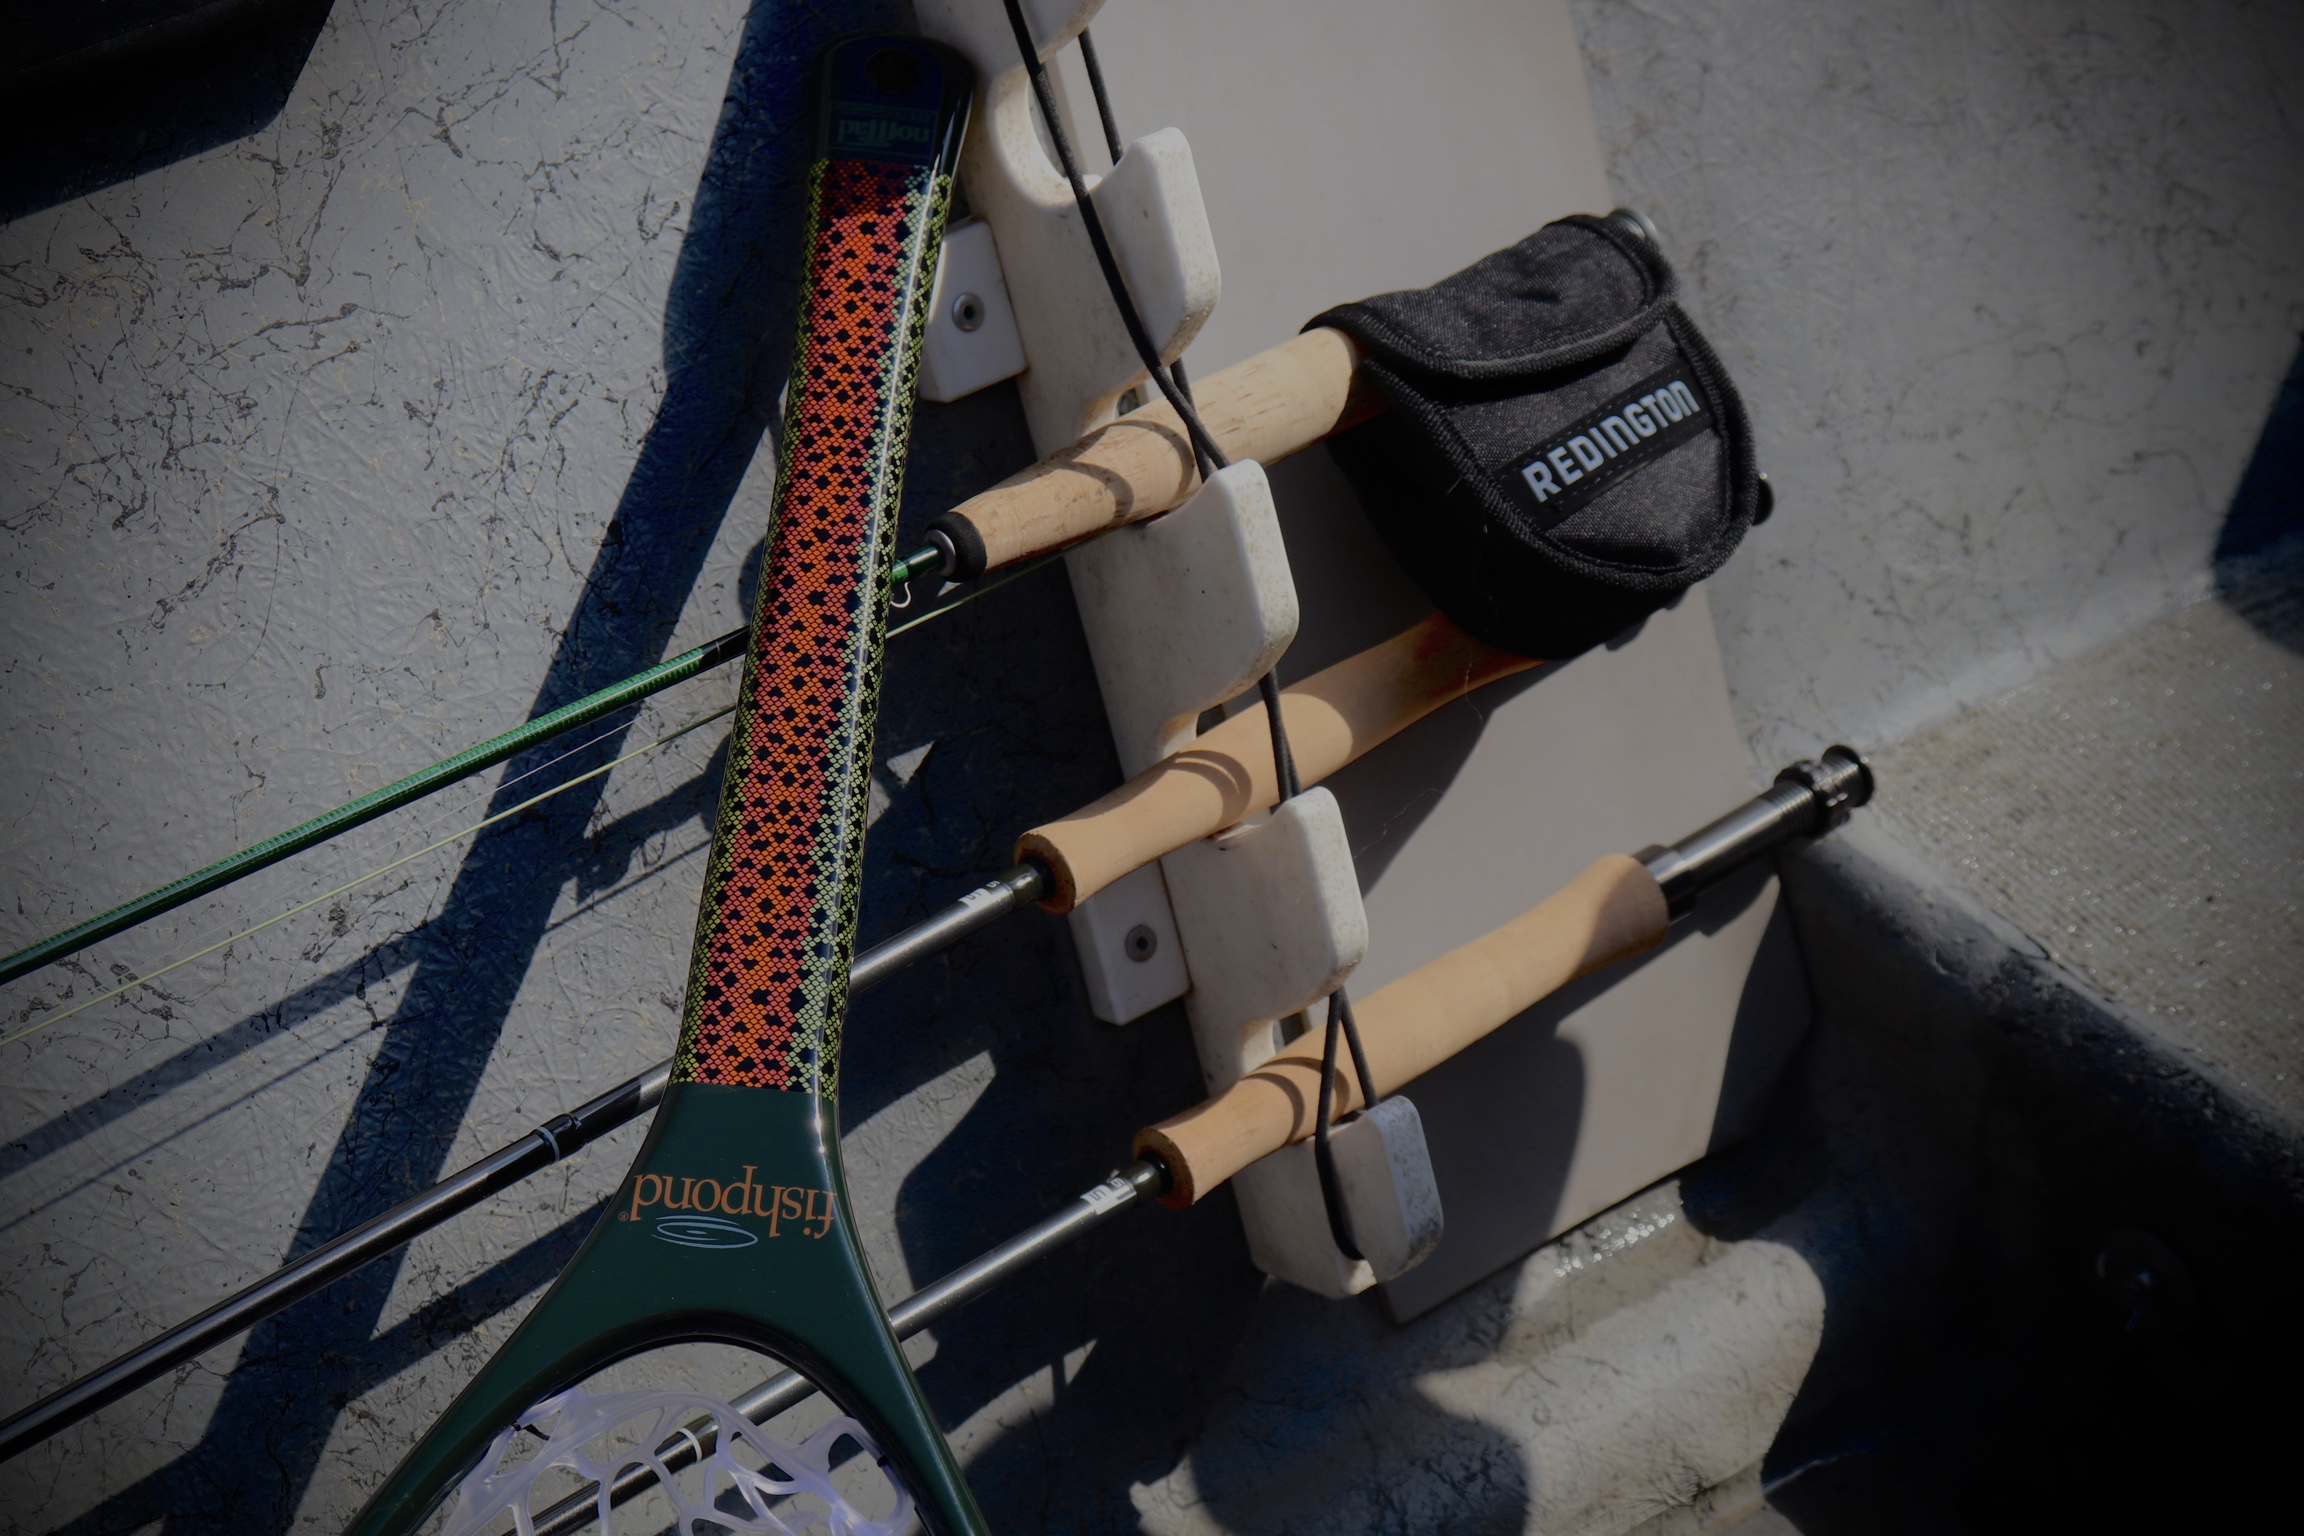 Fishpond Nomad Emerger Redstrip net sitting in the RFR boat next to some of our outfits